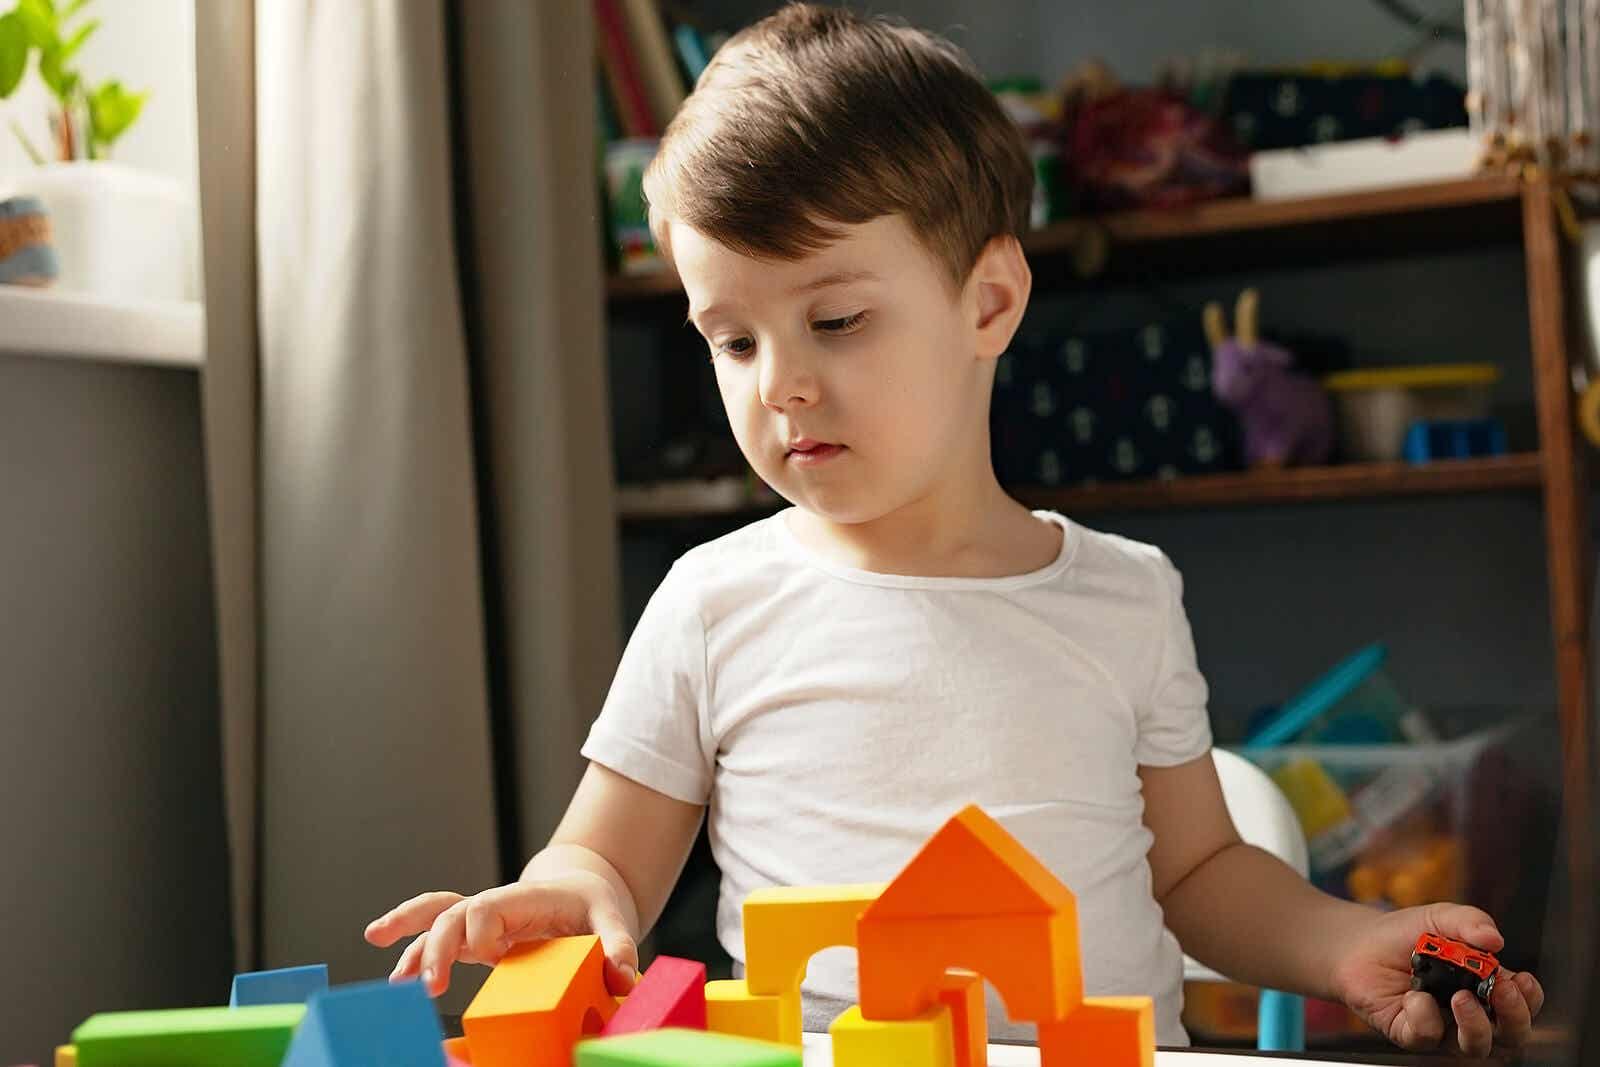 A child building with toy blocks.